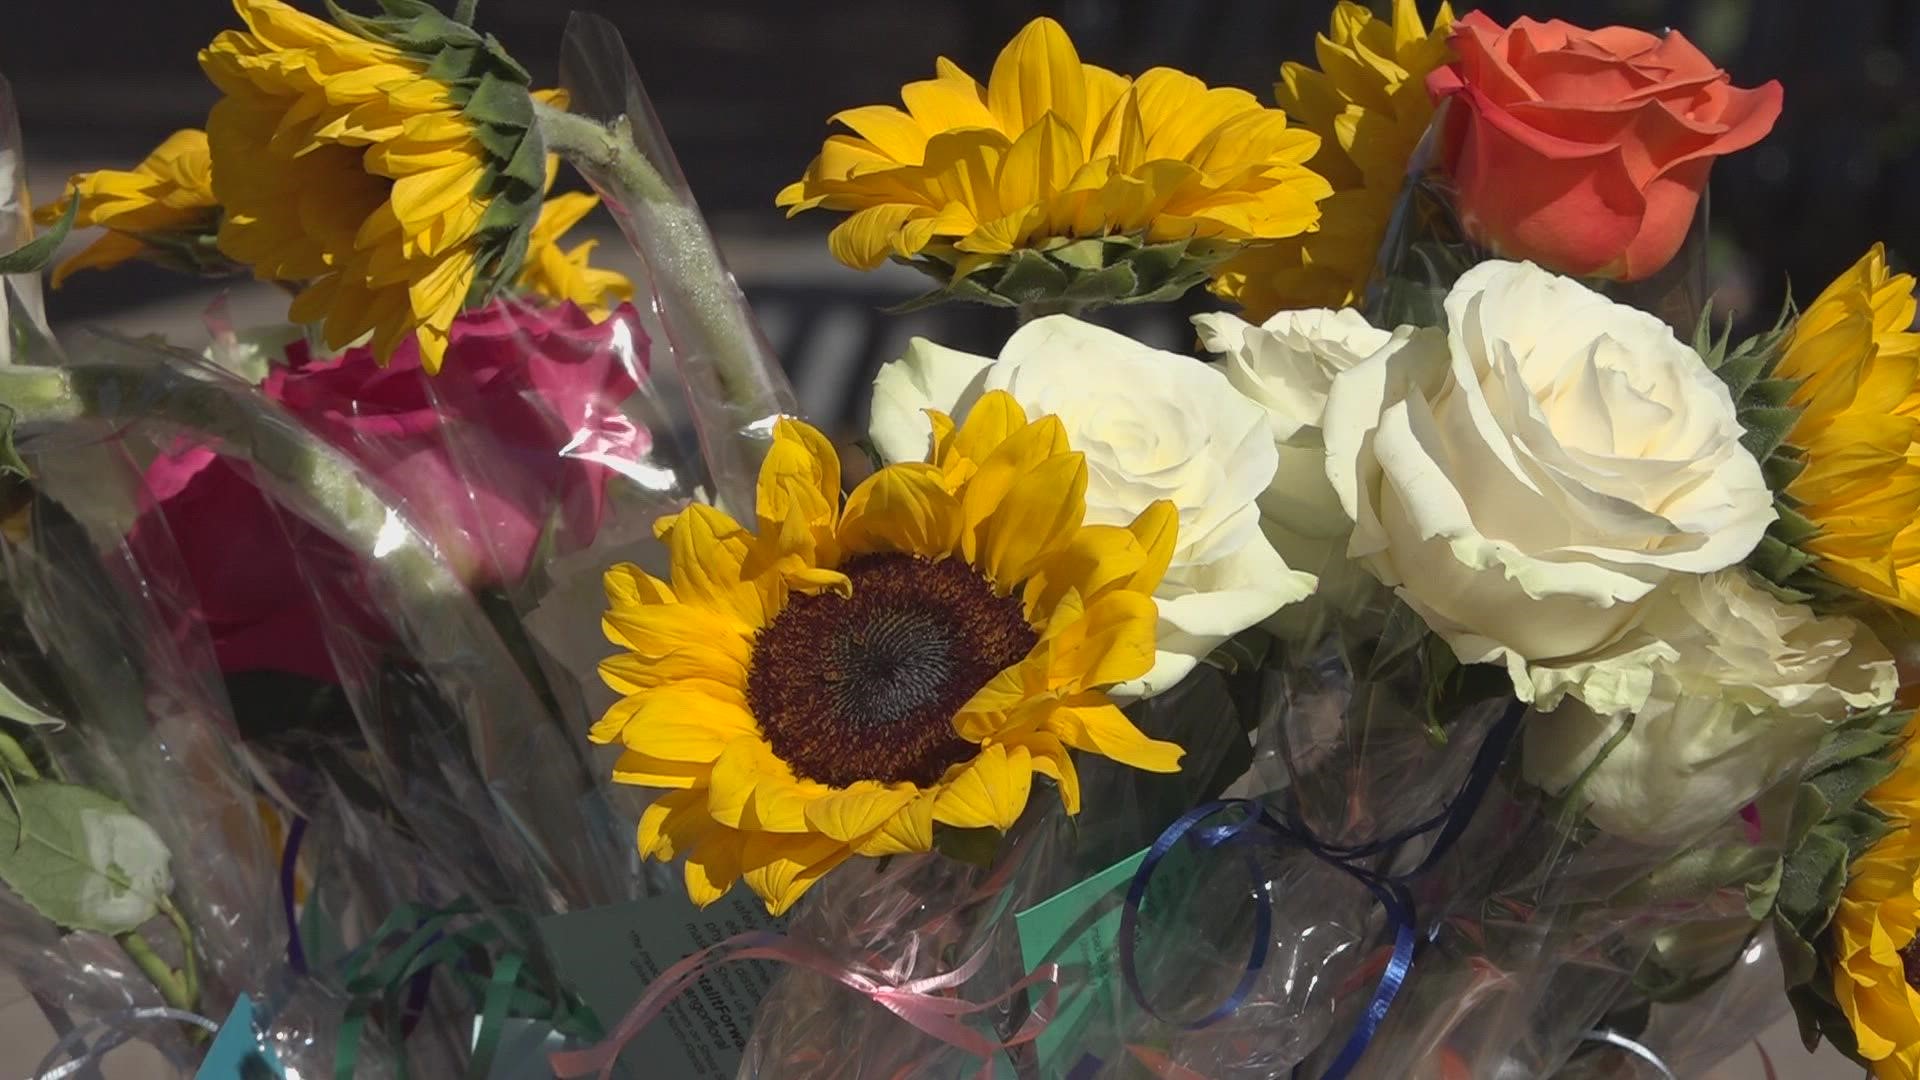 "Everyone loves getting flowers and I love just being able to surprise random people on the street," Joseph Langlois said.